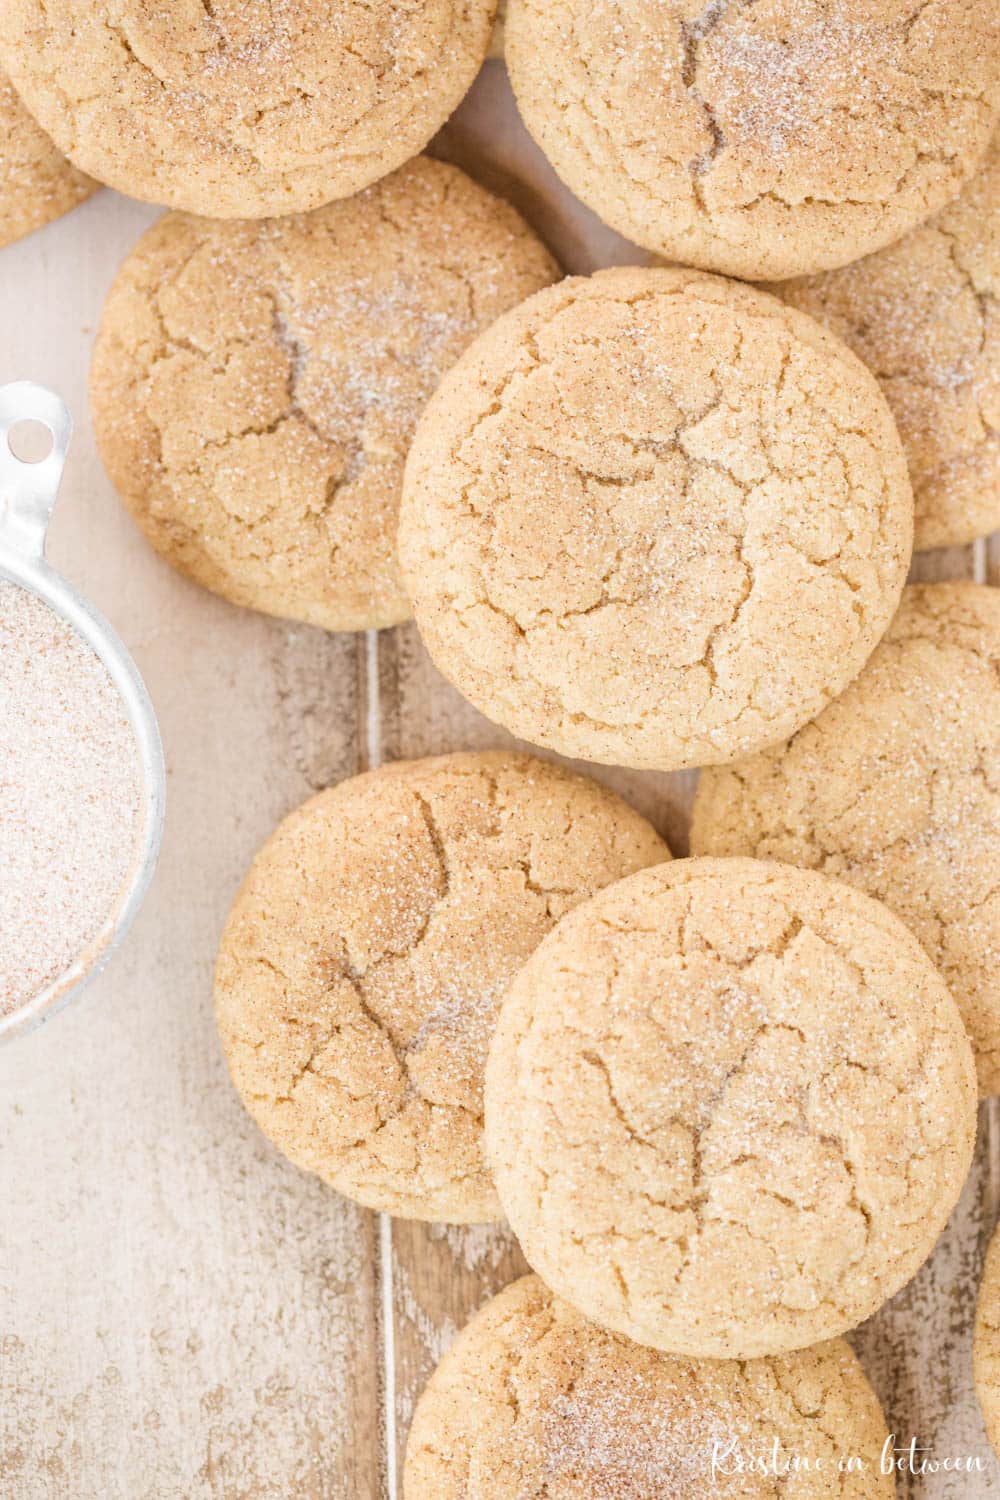 Cookies laying on a white antique wooden table with a small bowl of cinnamon and sugar.